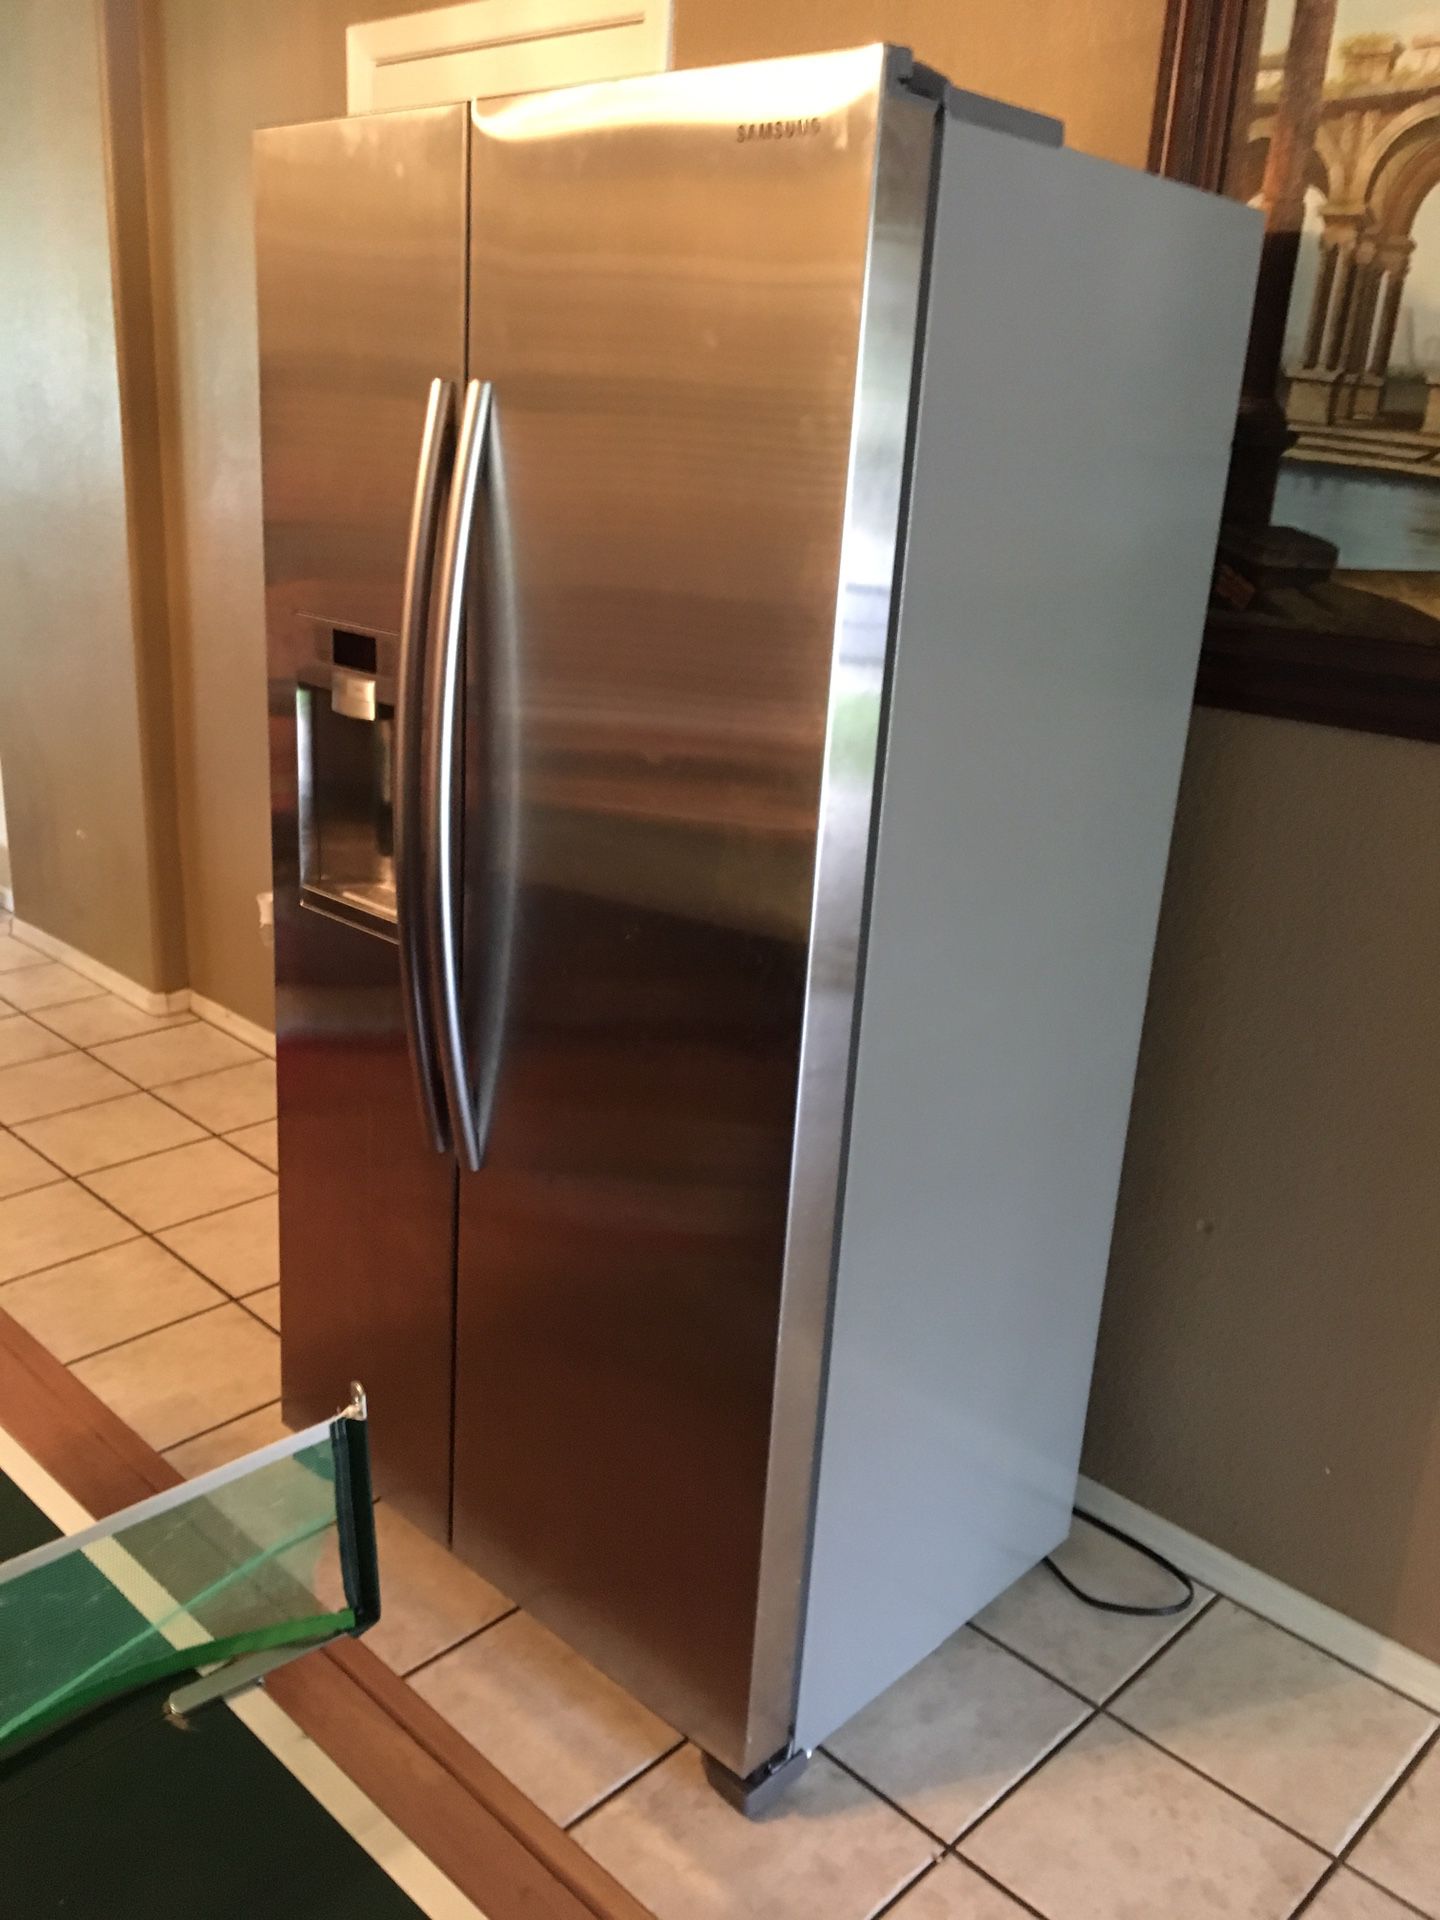 Samsung refrigerator twin cooling not freezing